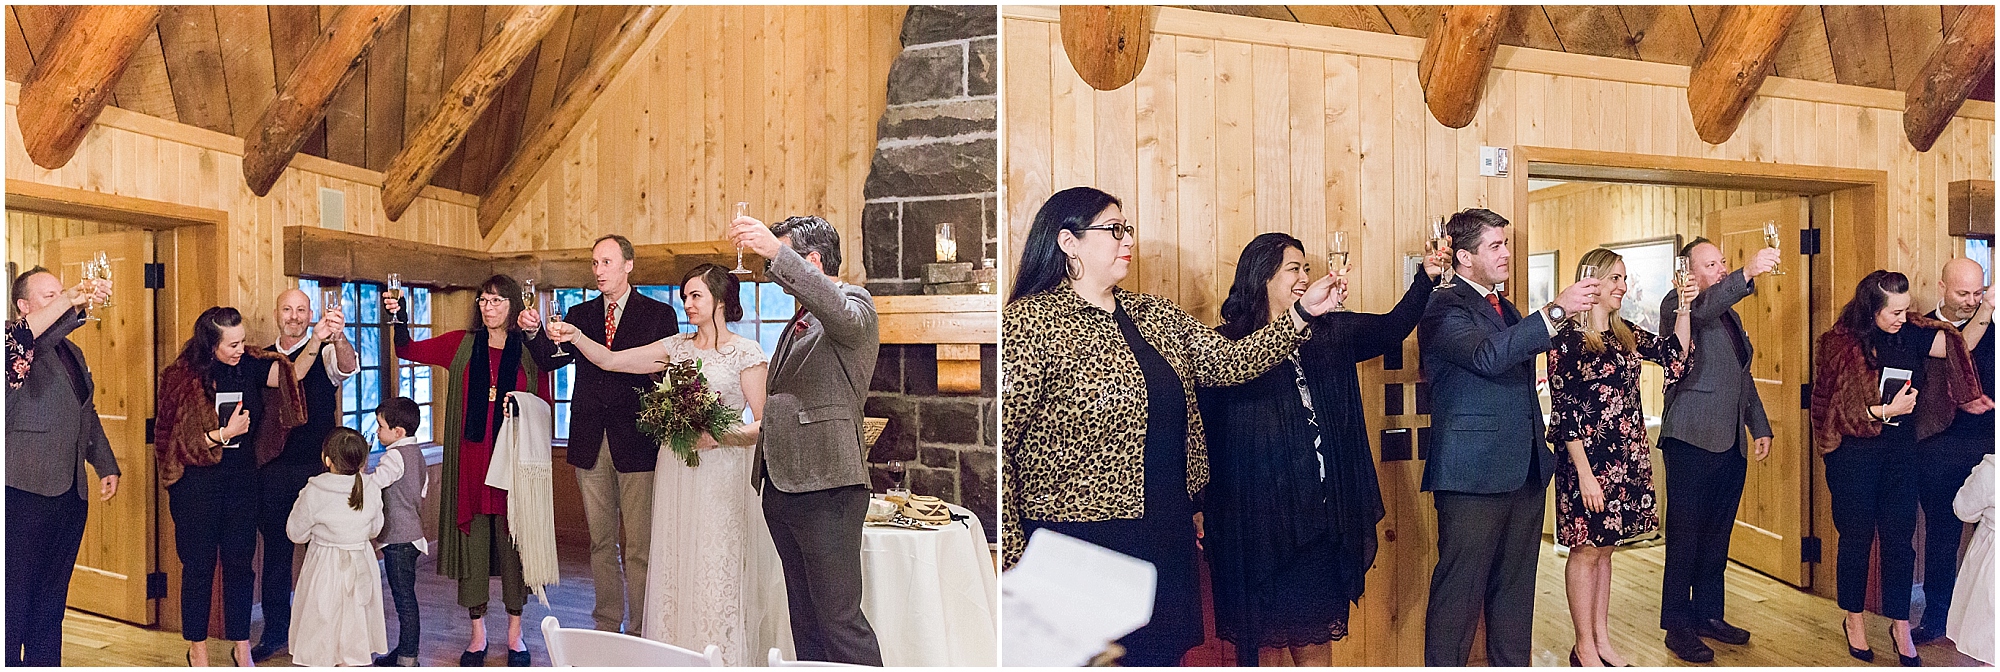 The couple celebrates with a champagne toast and a blessing from their Rabbi at this intimate wedding at the Fireside Room at Sunriver Resort in Oregon. | Erica Swantek Photography